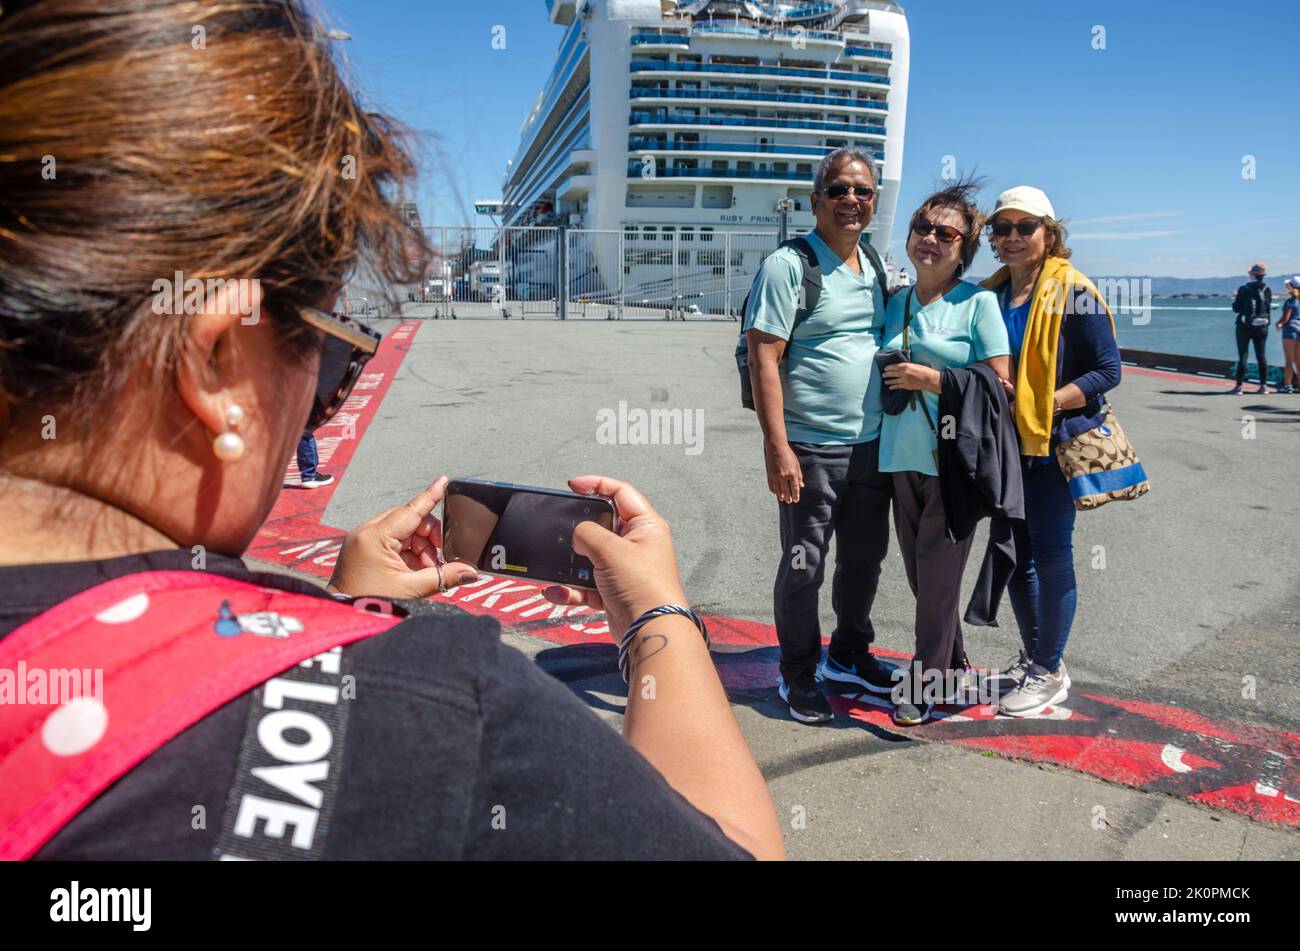 A lady takes a photo of family in front of Ruby Princess, a cruise liner docked at The James R Herman Cruise Terminal at Pier 27 in San Francisco Stock Photo